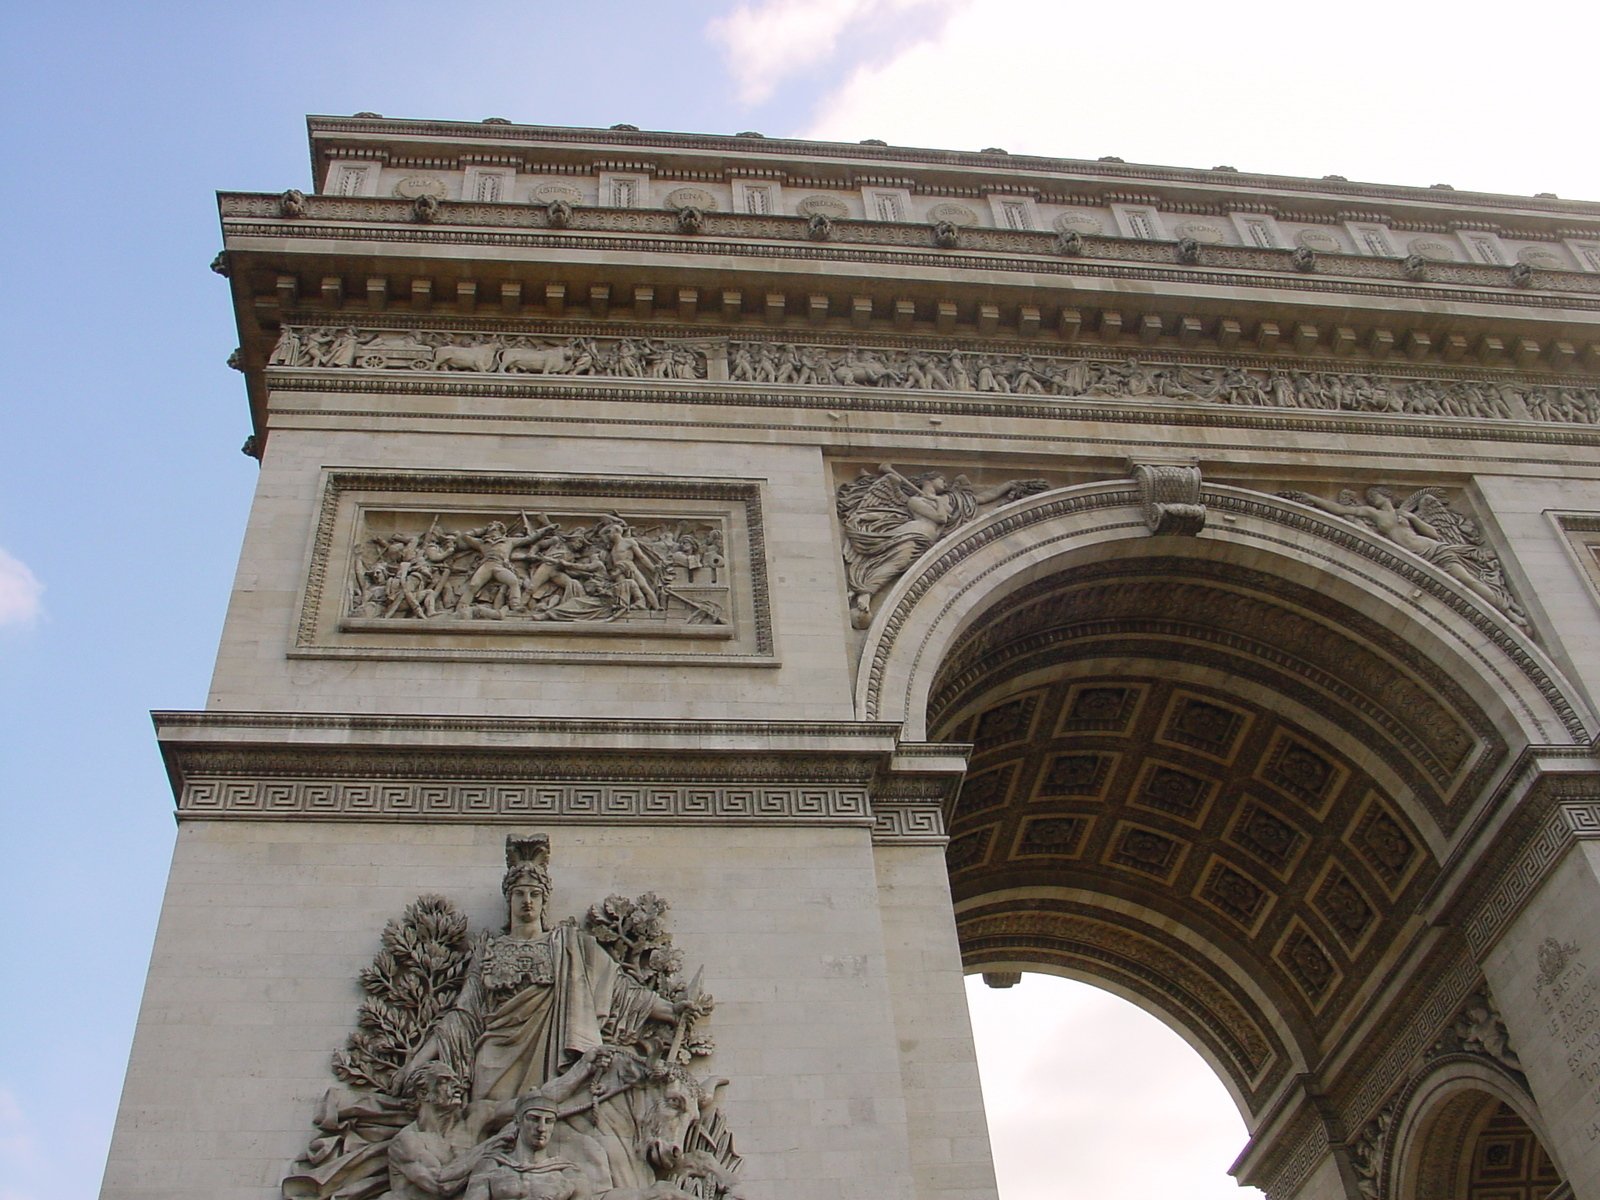 the arch is set in very ornate carving